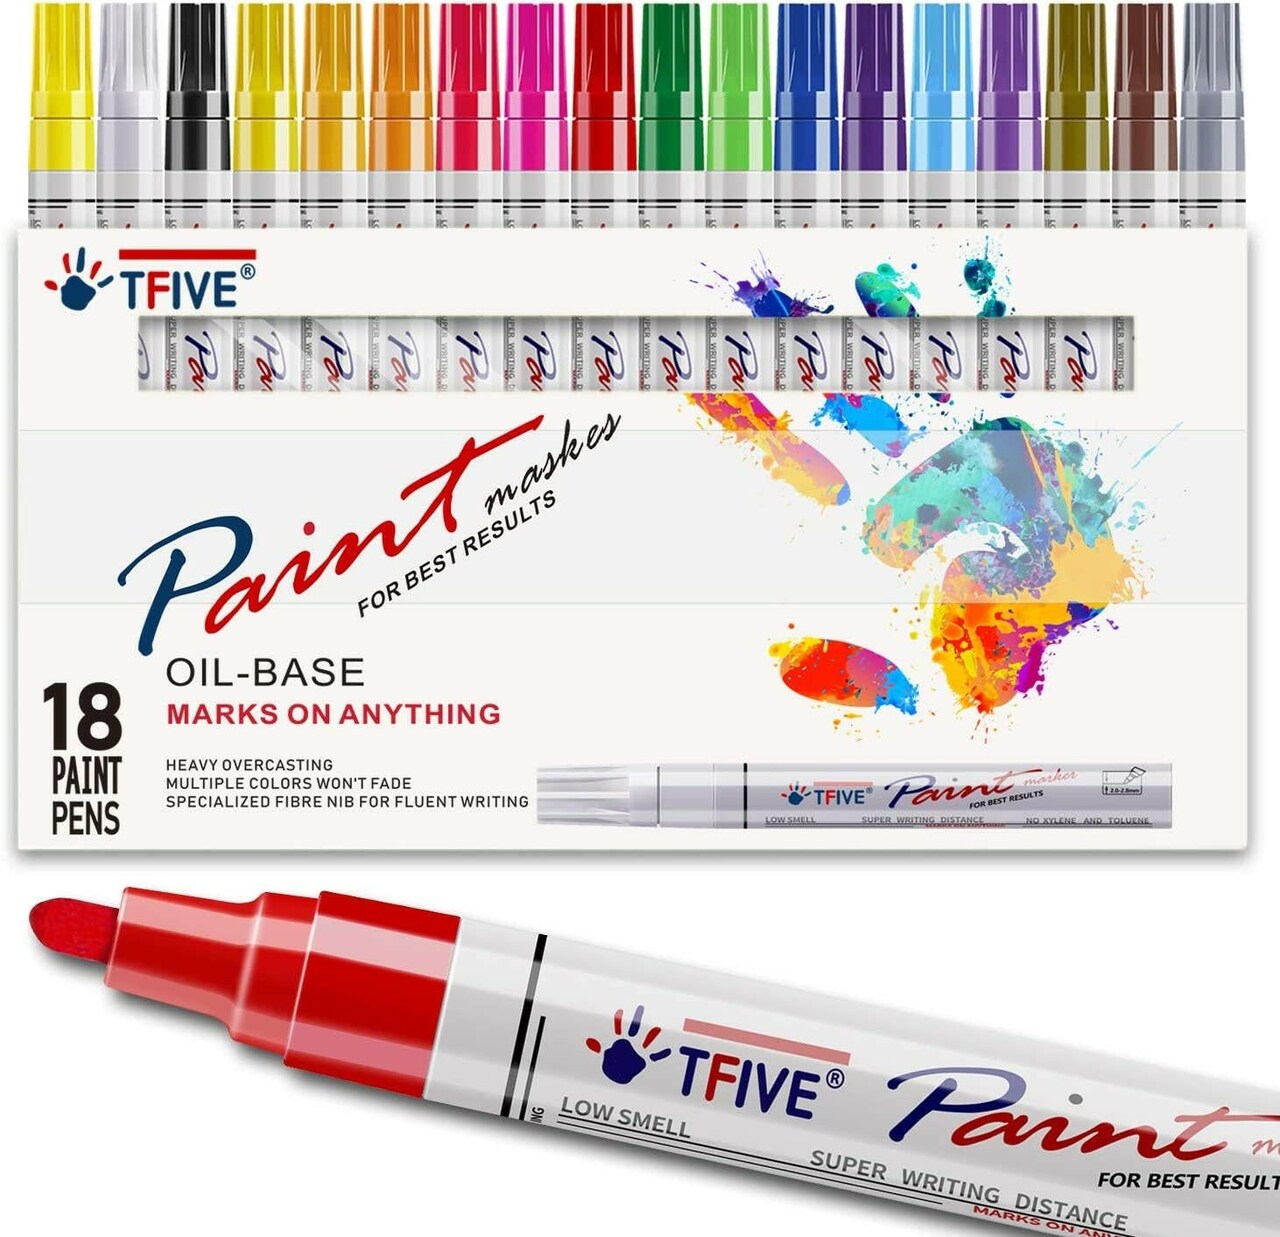 Paint Pens Never Fade Quick Dry and Permanent, Oil-Based Waterproof Marker  Set for Rock Painting, Ceramic, Wood, Fabric, Plastic, Canvas, Glass, Mugs